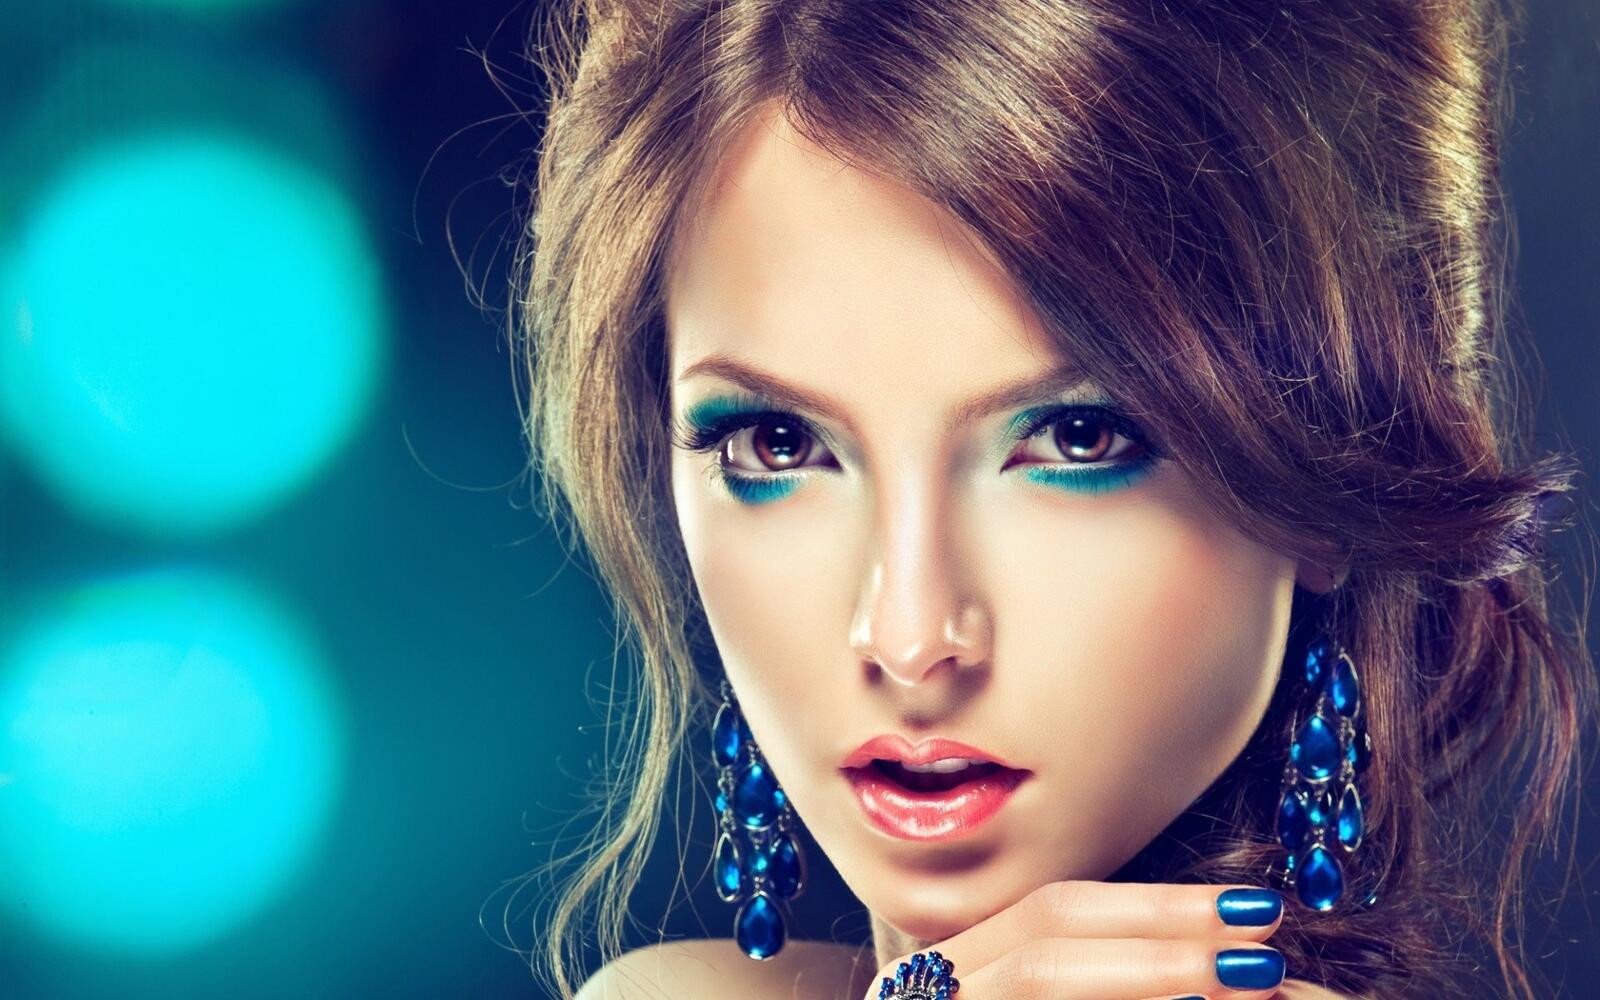 Wallpapers sight make-up hairstyle on the desktop